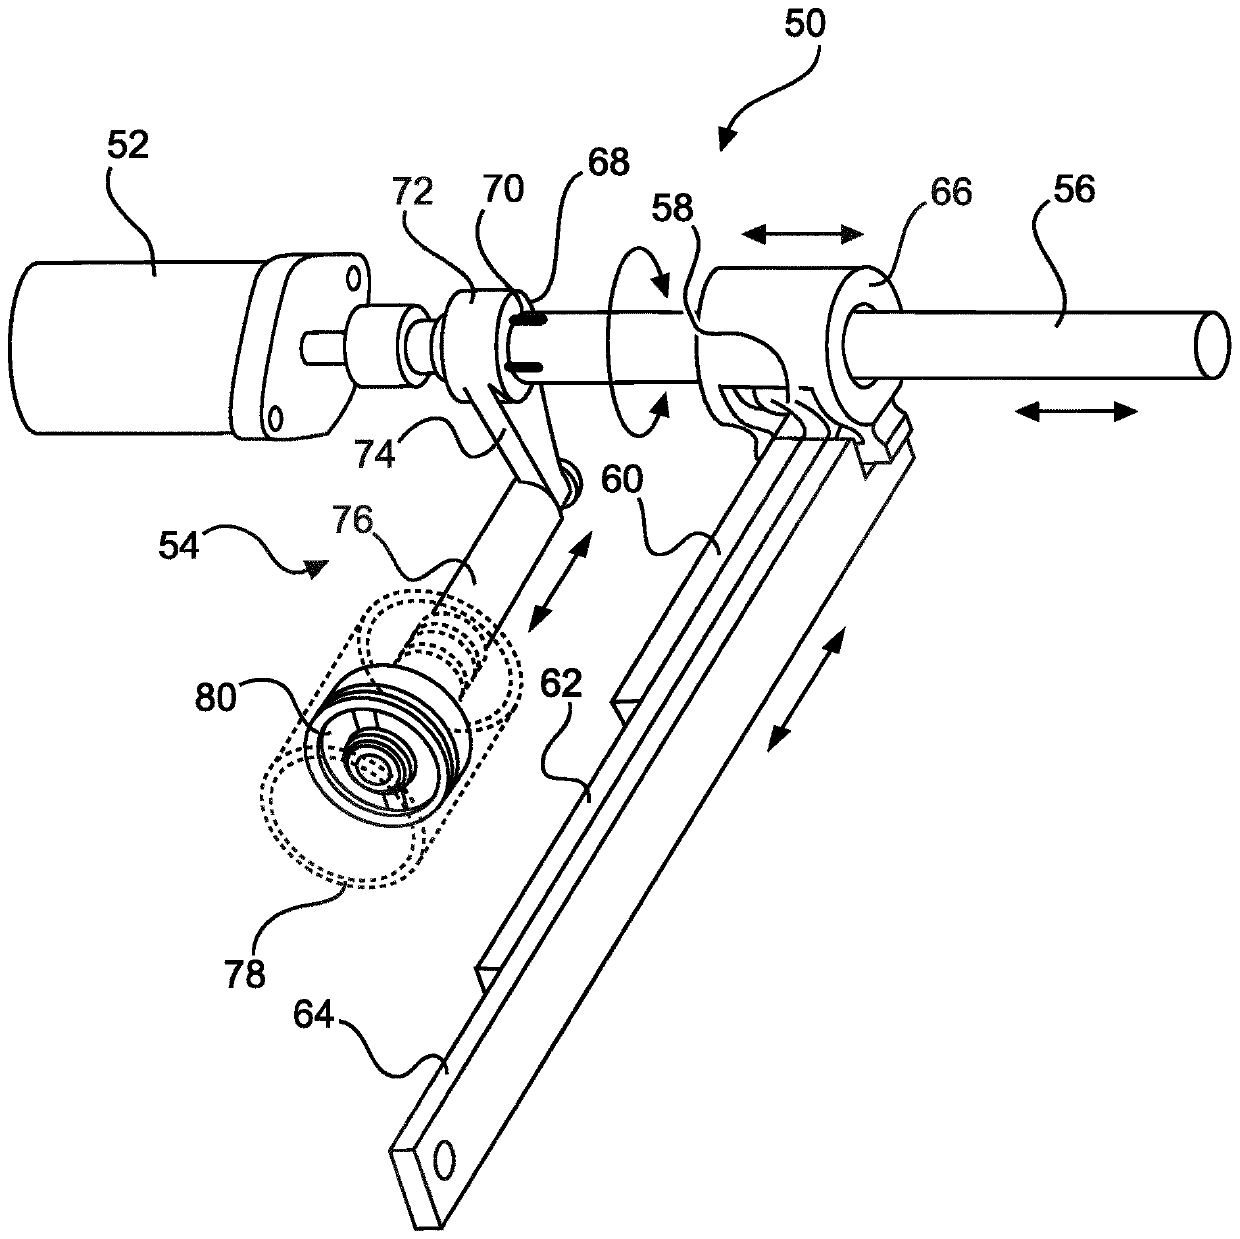 Gear and gate (XY) gear actuator